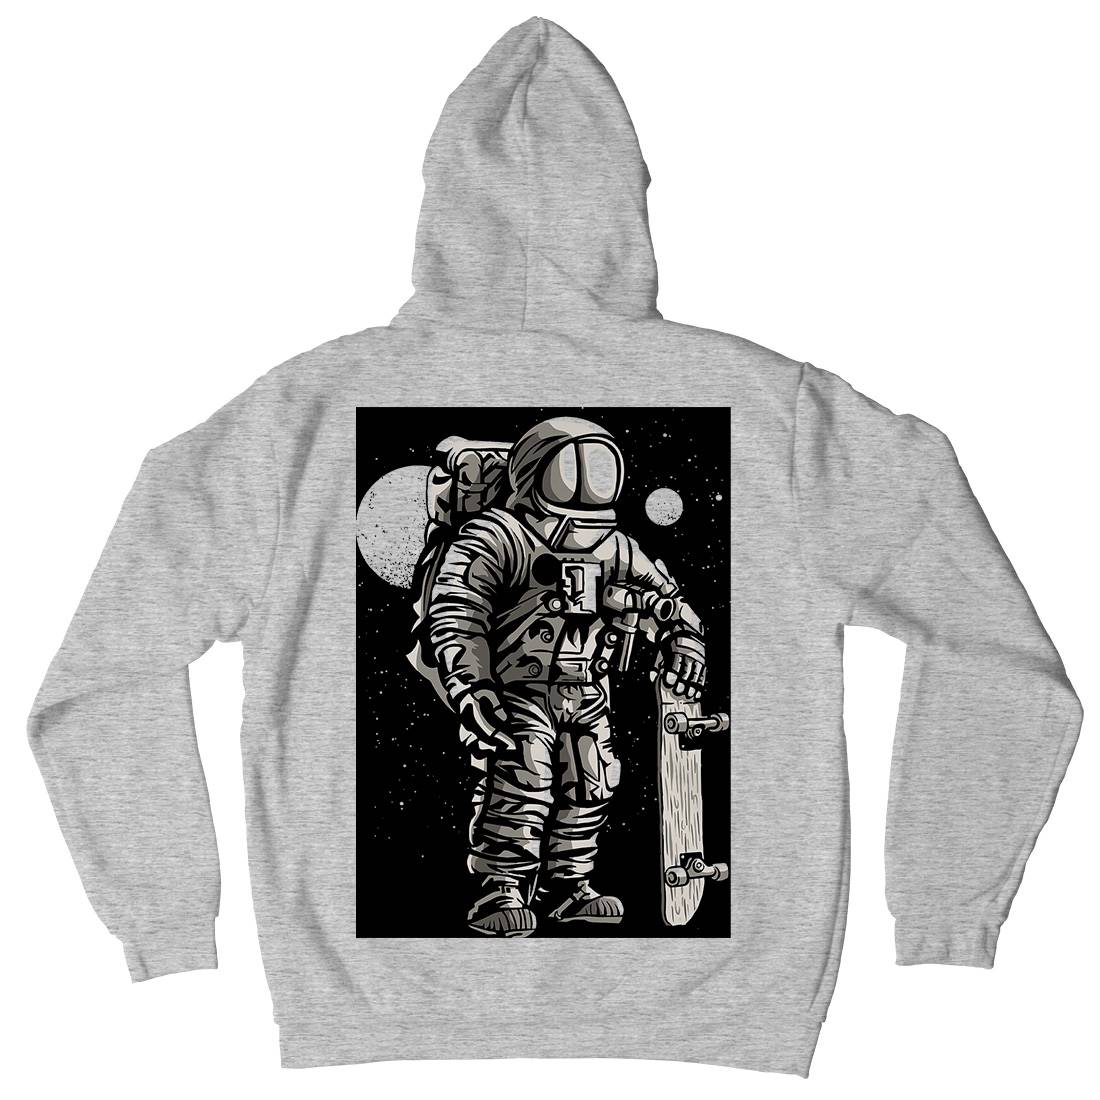 Astronaut Skater Kids Crew Neck Hoodie Space A509